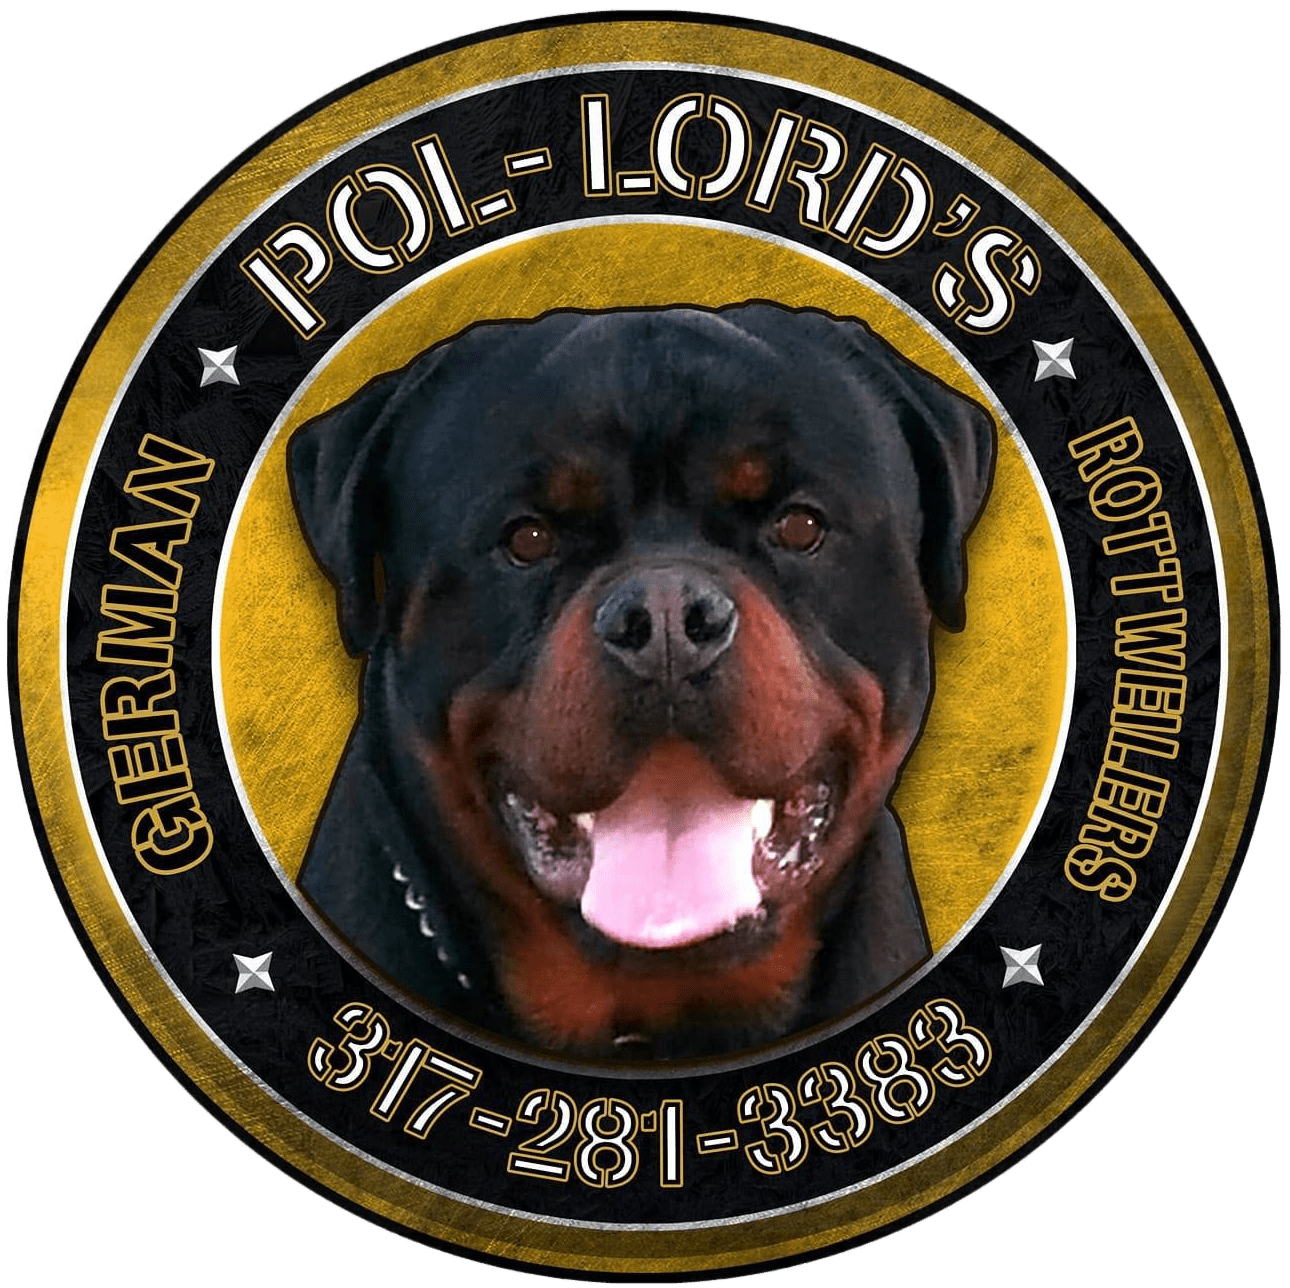 POL-LORDS